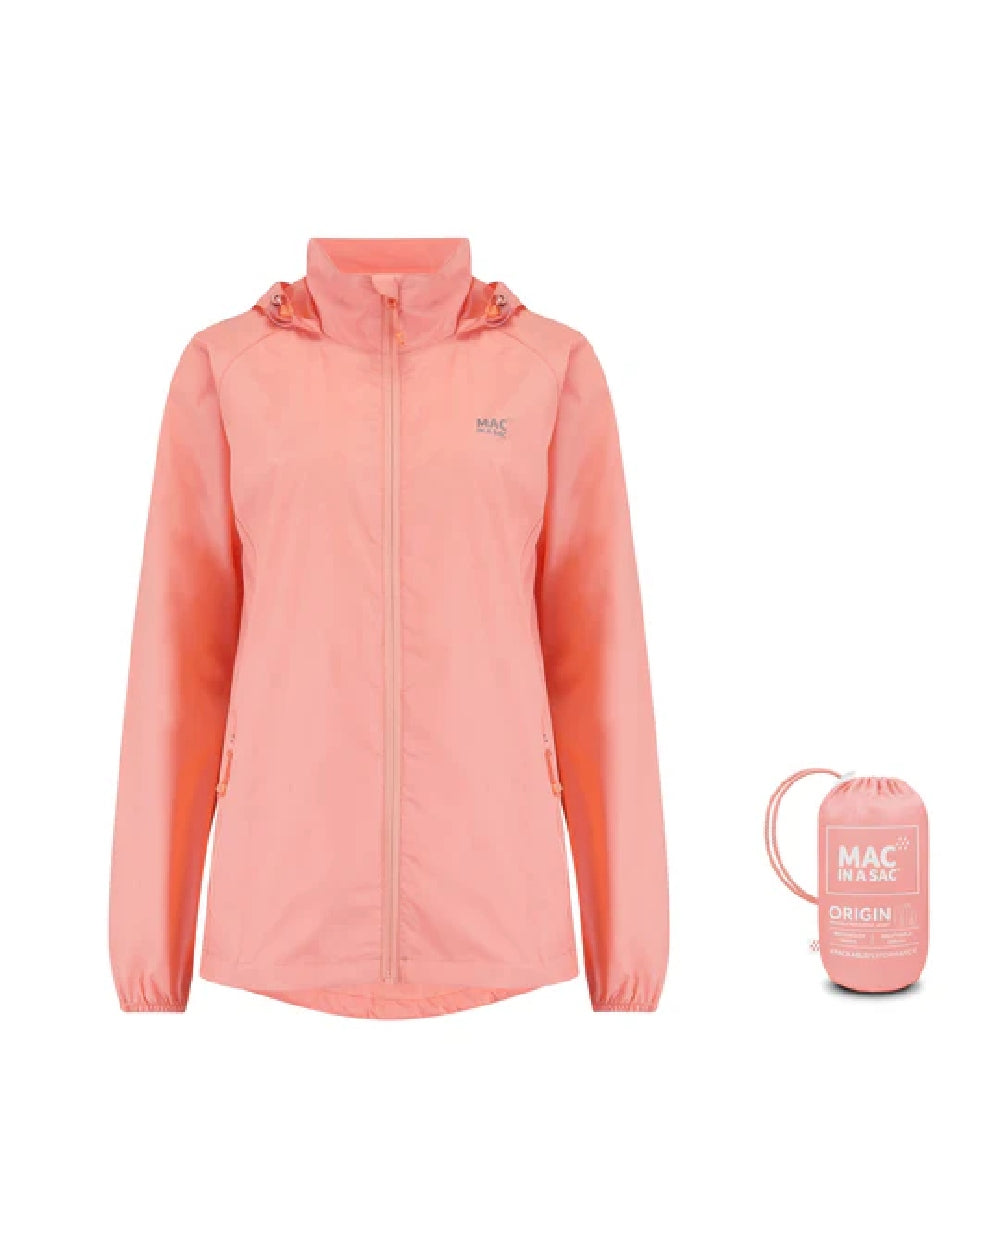 Soft Coral coloured Mac In A Sac Packable Origin Waterproof Jacket on white background 